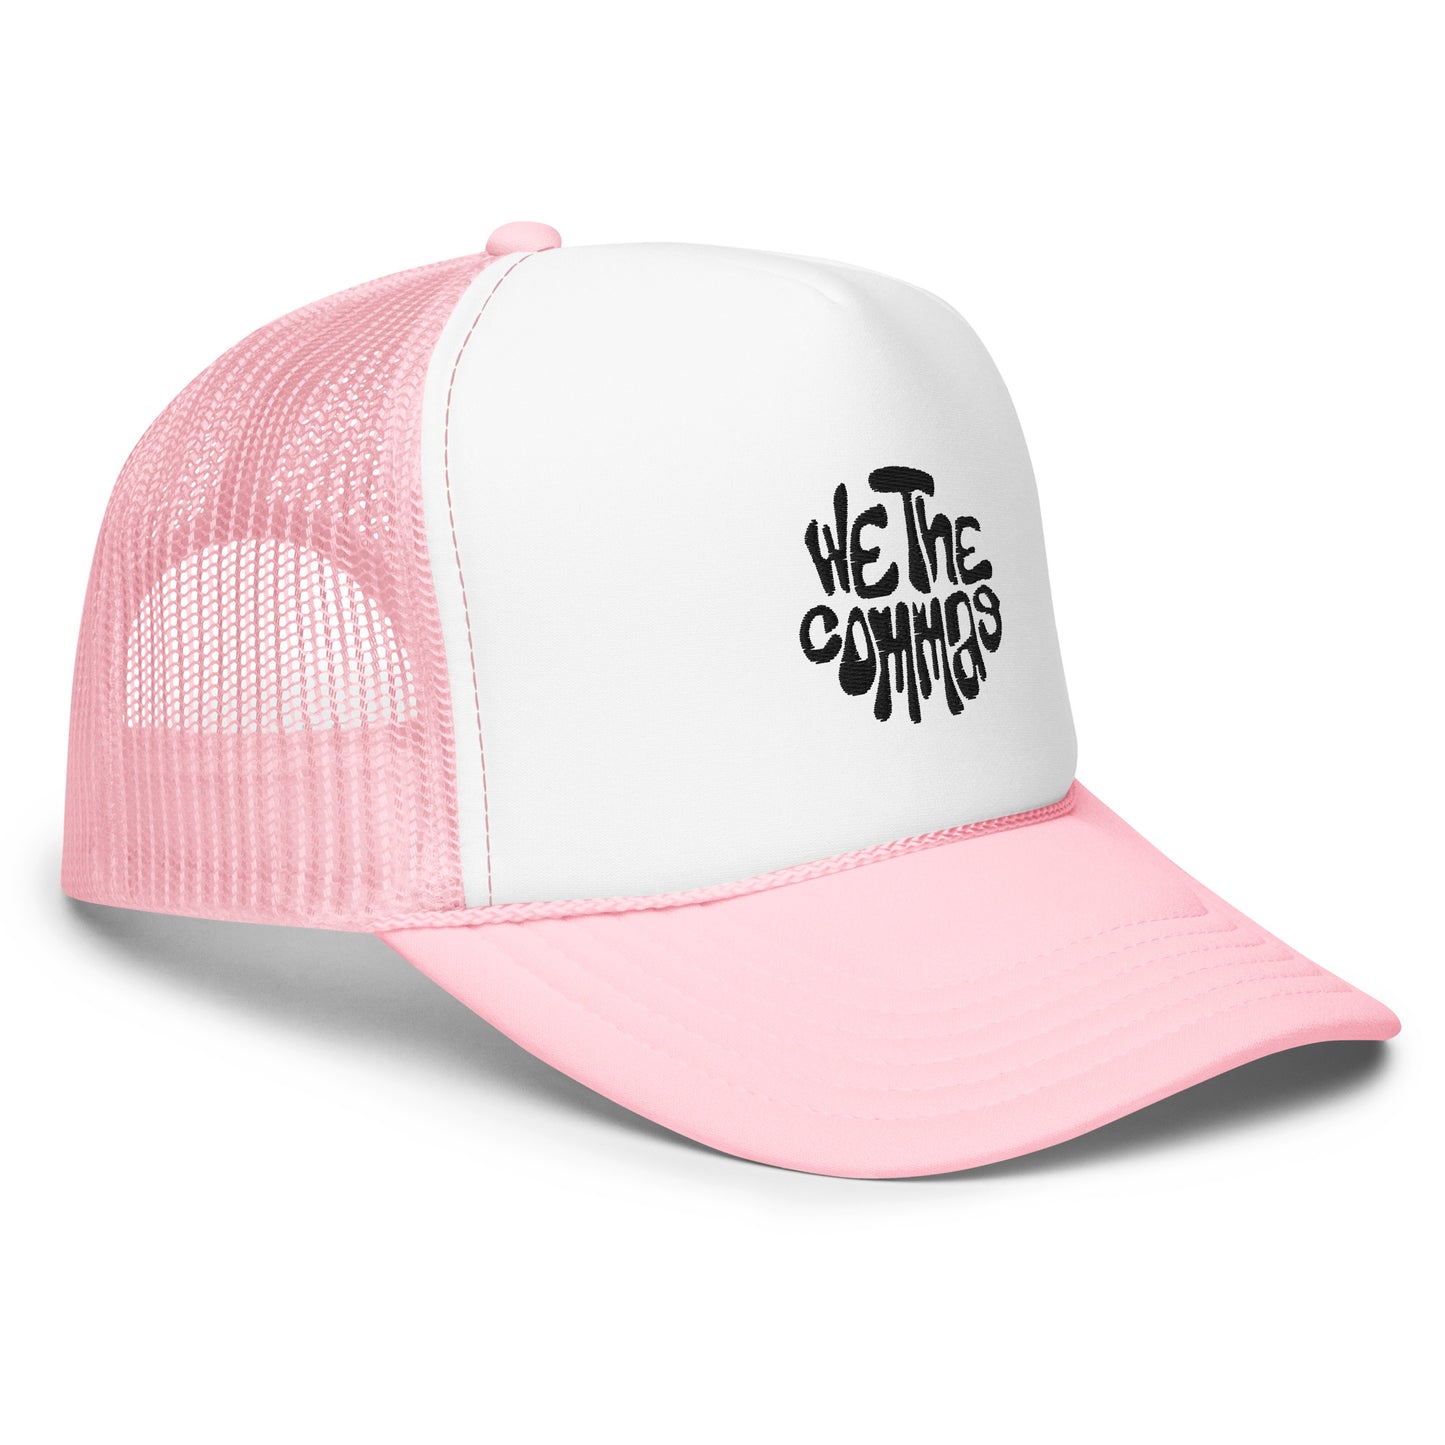 WE THE COMMAS EMBROIDERED TRUCKER